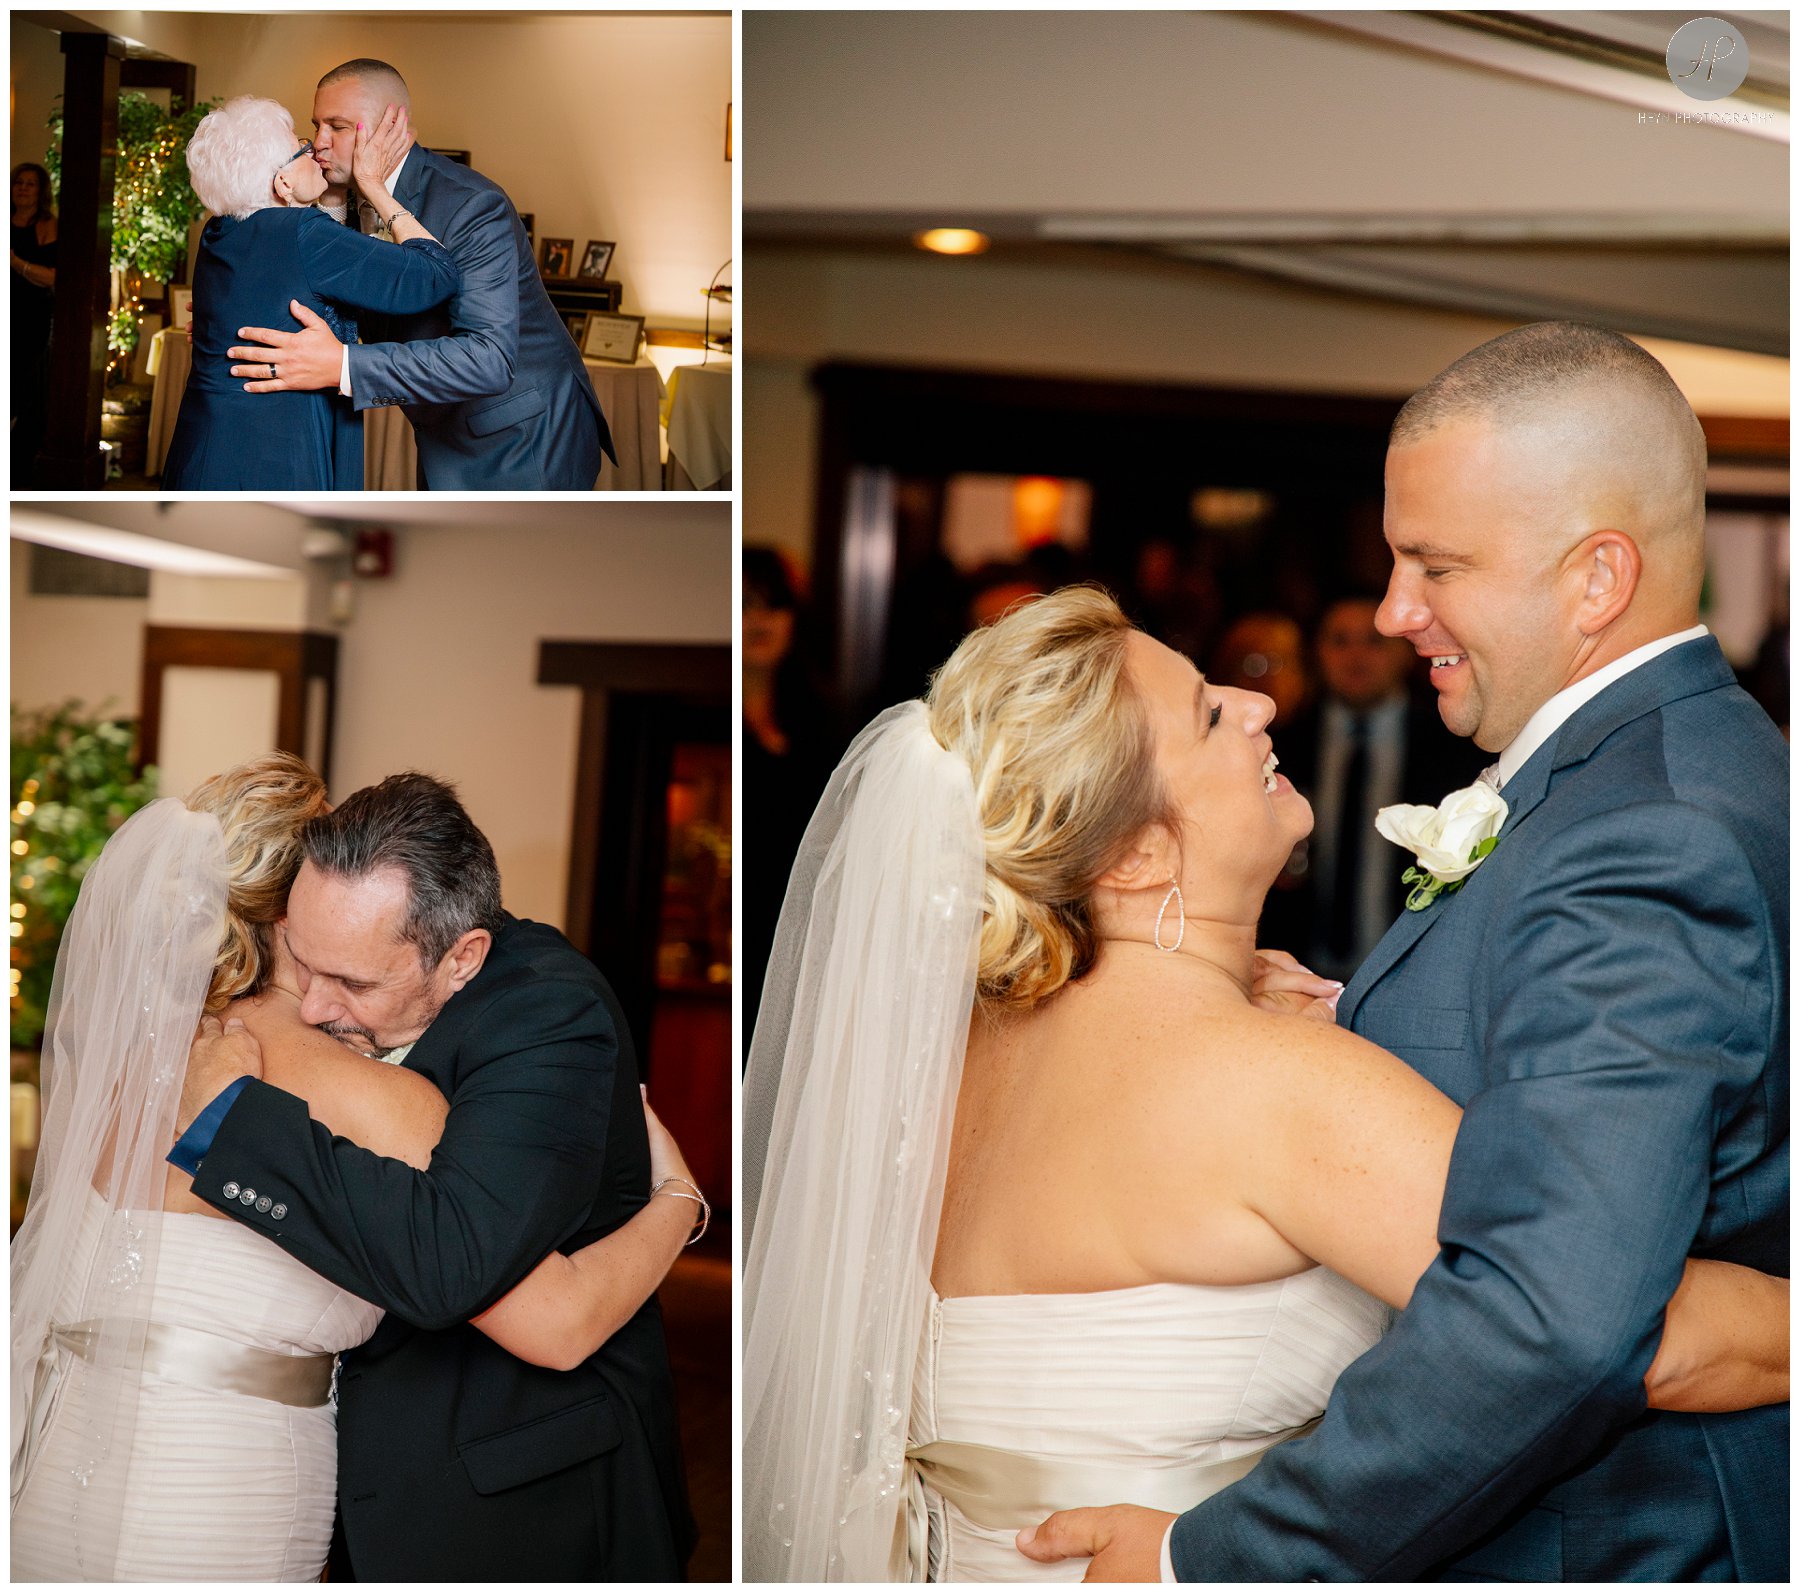 bride and groom first dance at salt creek grille wedding in new jersey 